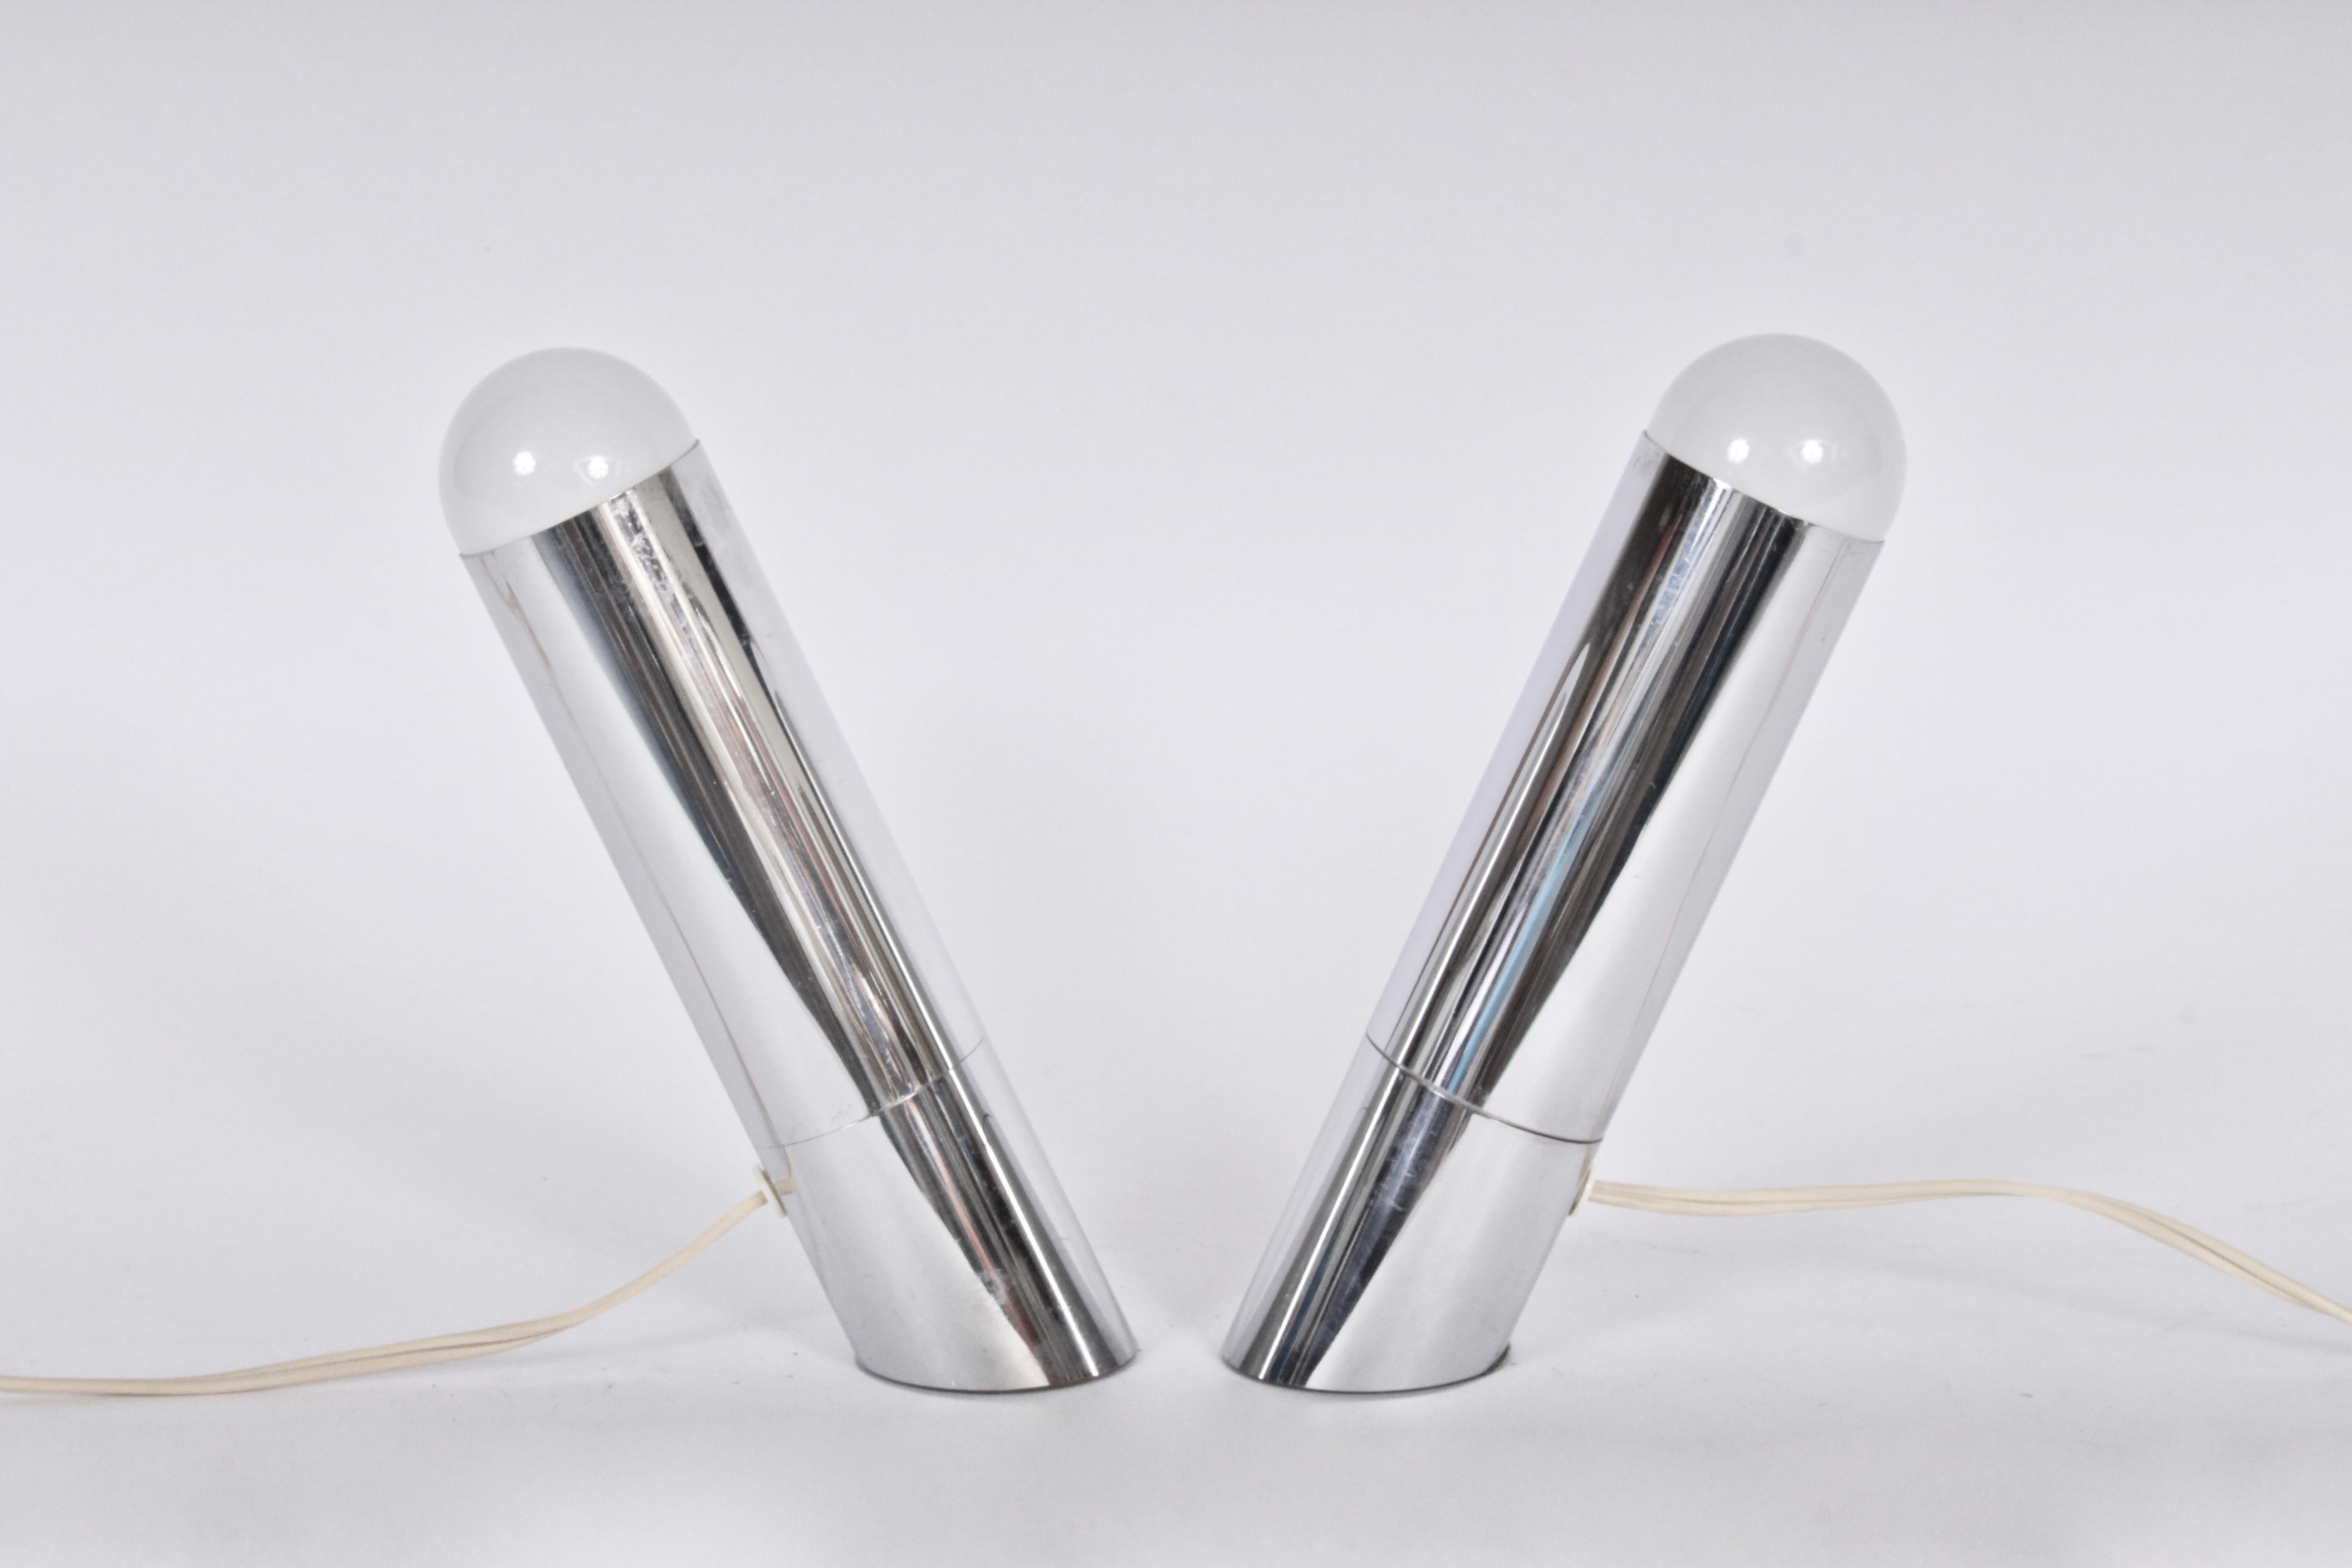 Small Pair of Paul Mayen Style Angled Chrome Table Lamps, c. 1970 In Good Condition For Sale In Bainbridge, NY